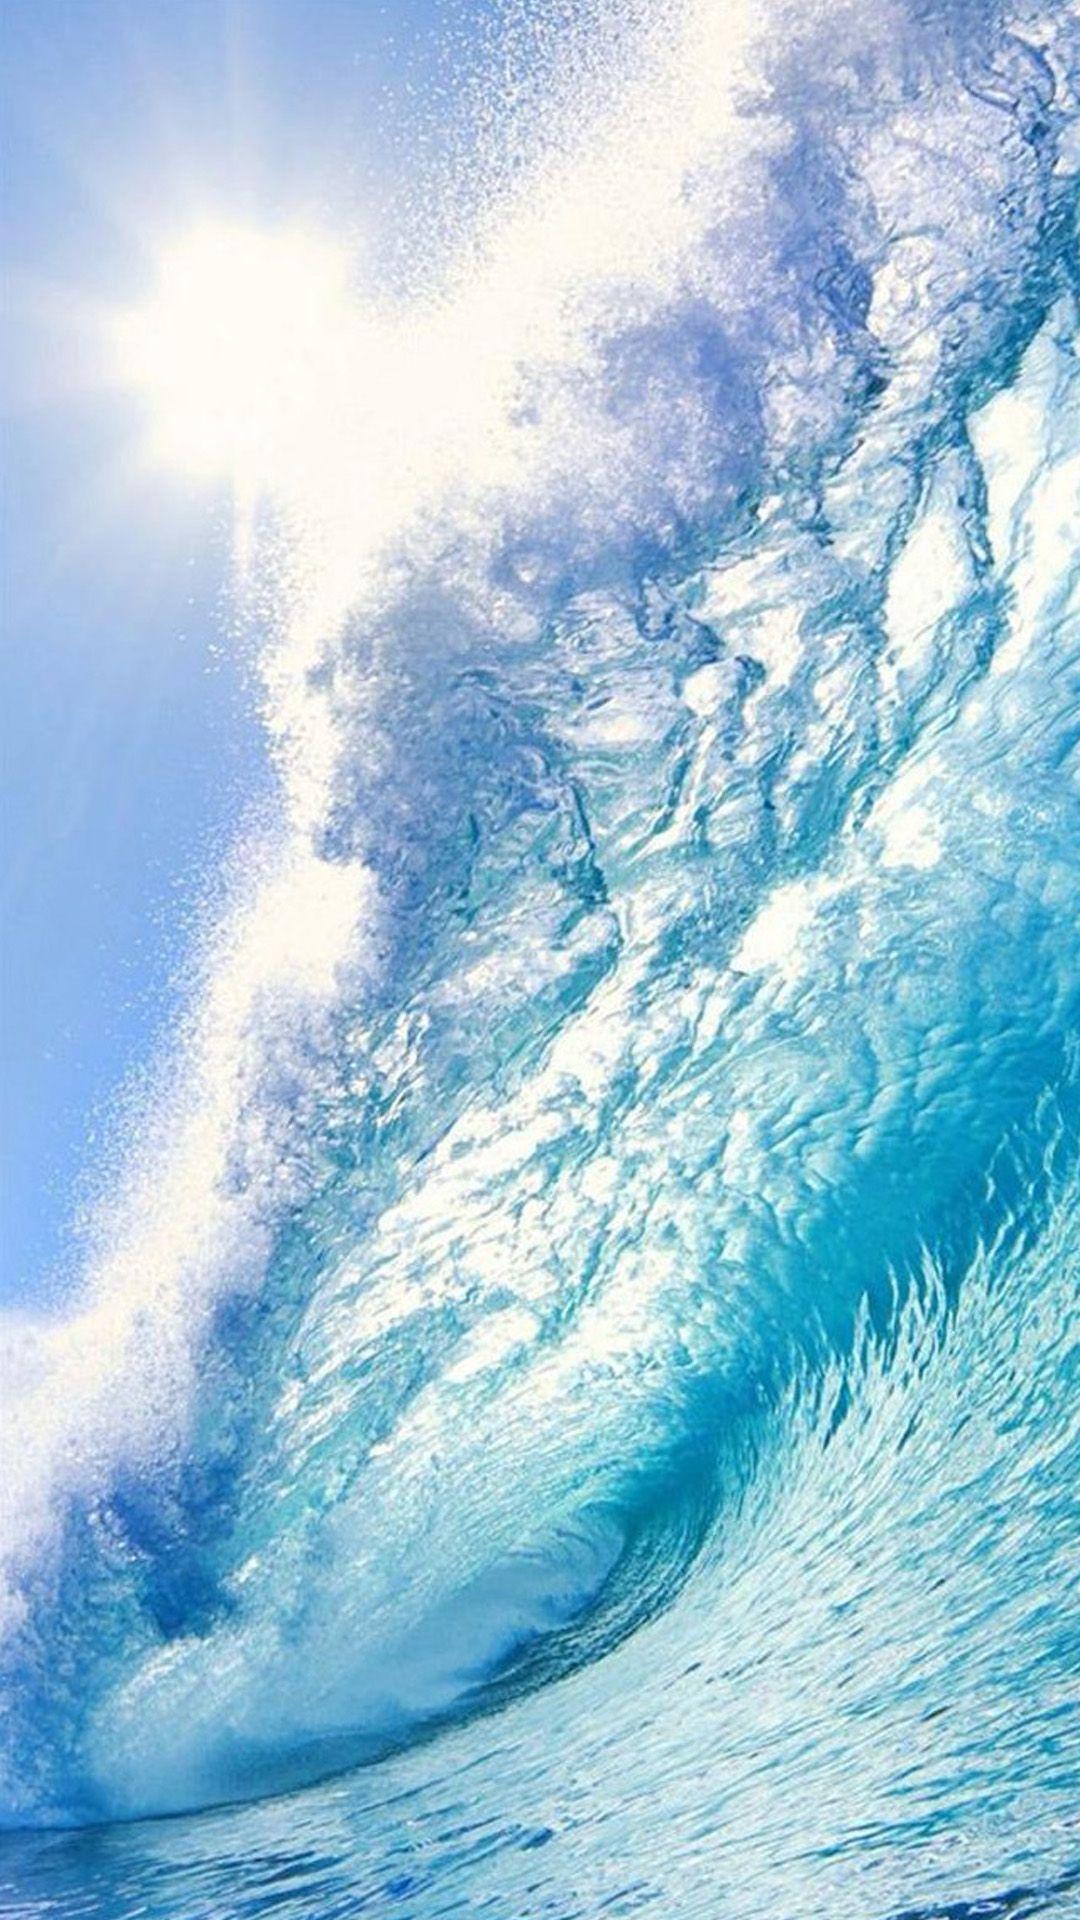 Big Wave Surfing Iphone Wallpapers Top Free Big Wave Surfing Iphone Backgrounds Wallpaperaccess